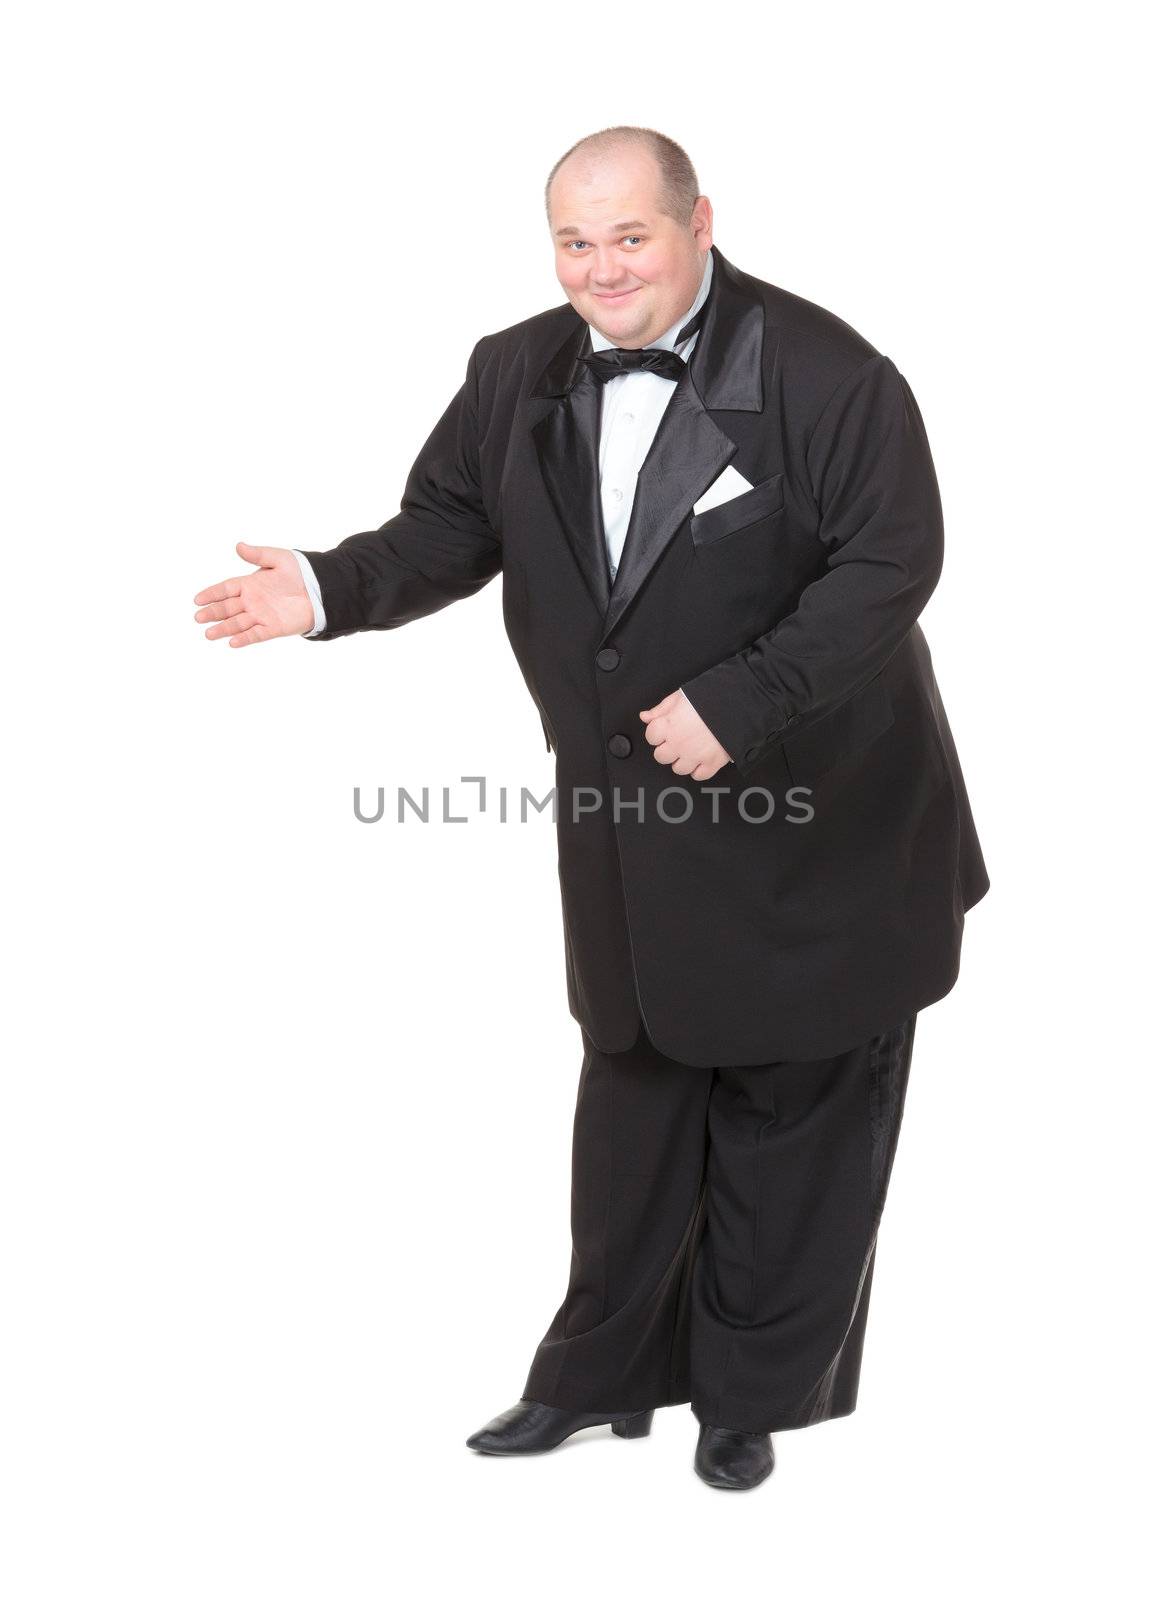 Elegant fat man in a dinner jacket and bow tie smiling charmingly as he holds out his hand to the side gesturing in that direction